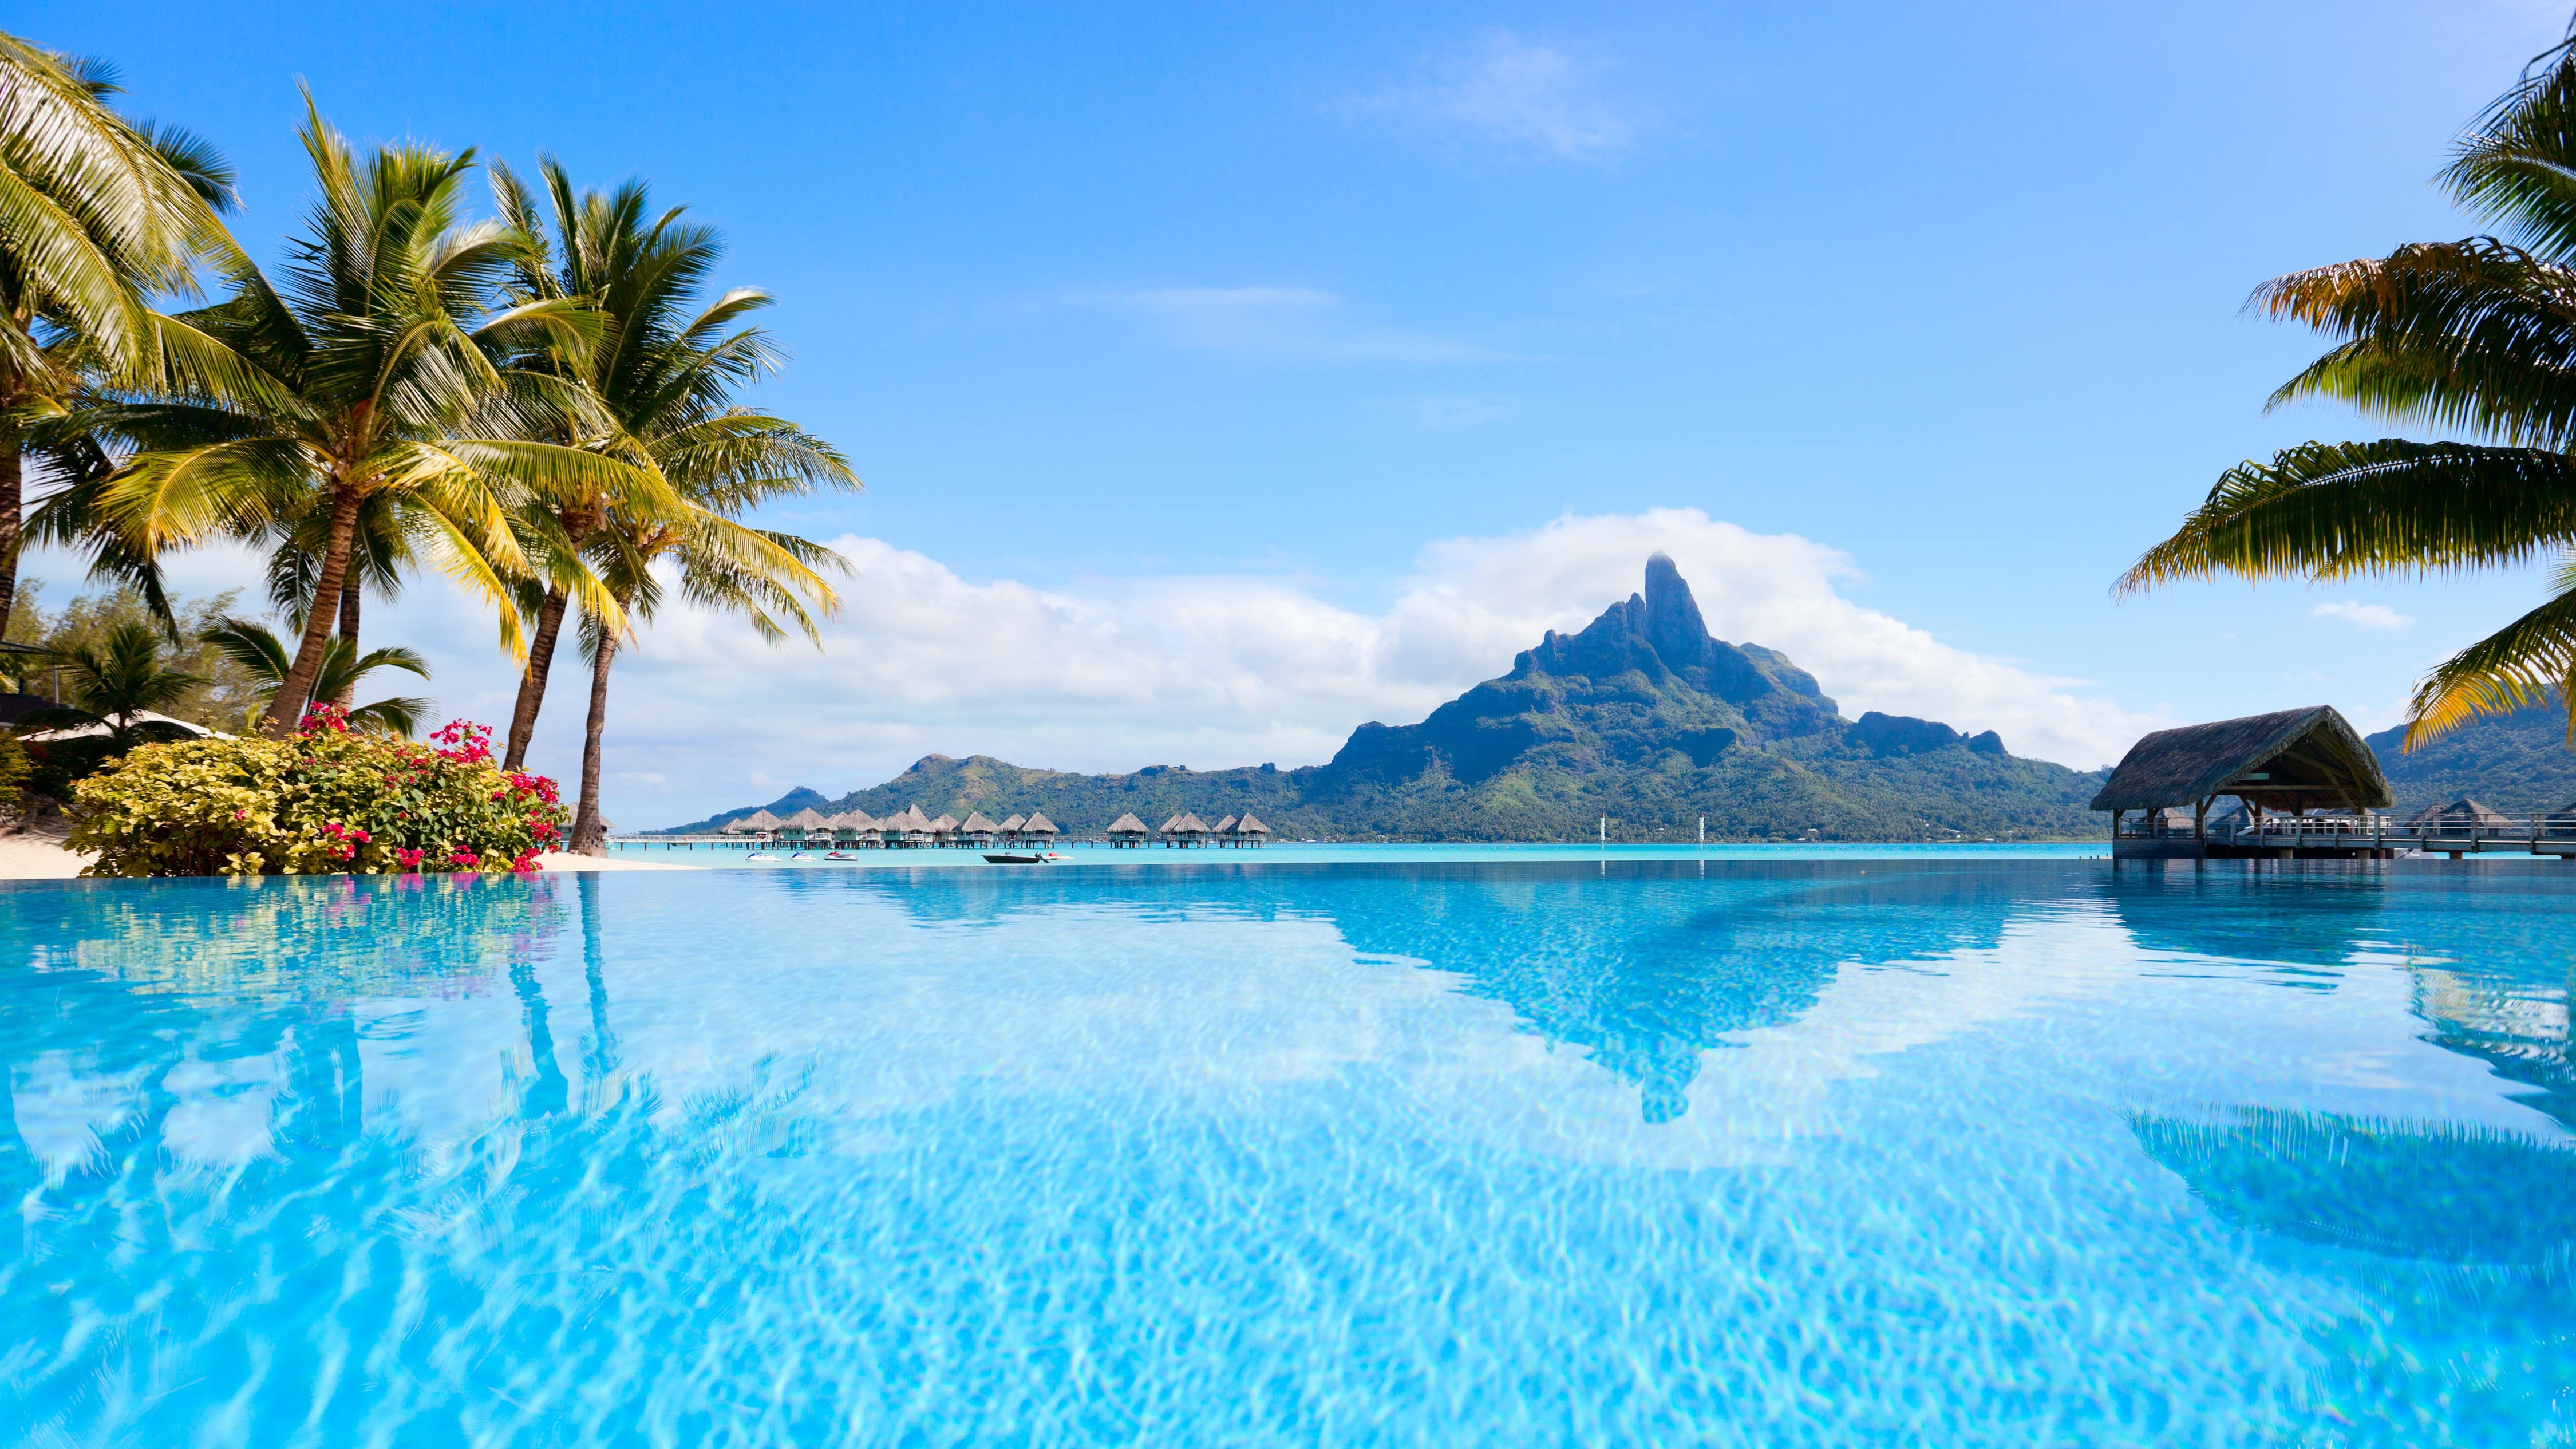 Enjoy an unforgettable experience with Bora Bora vacations